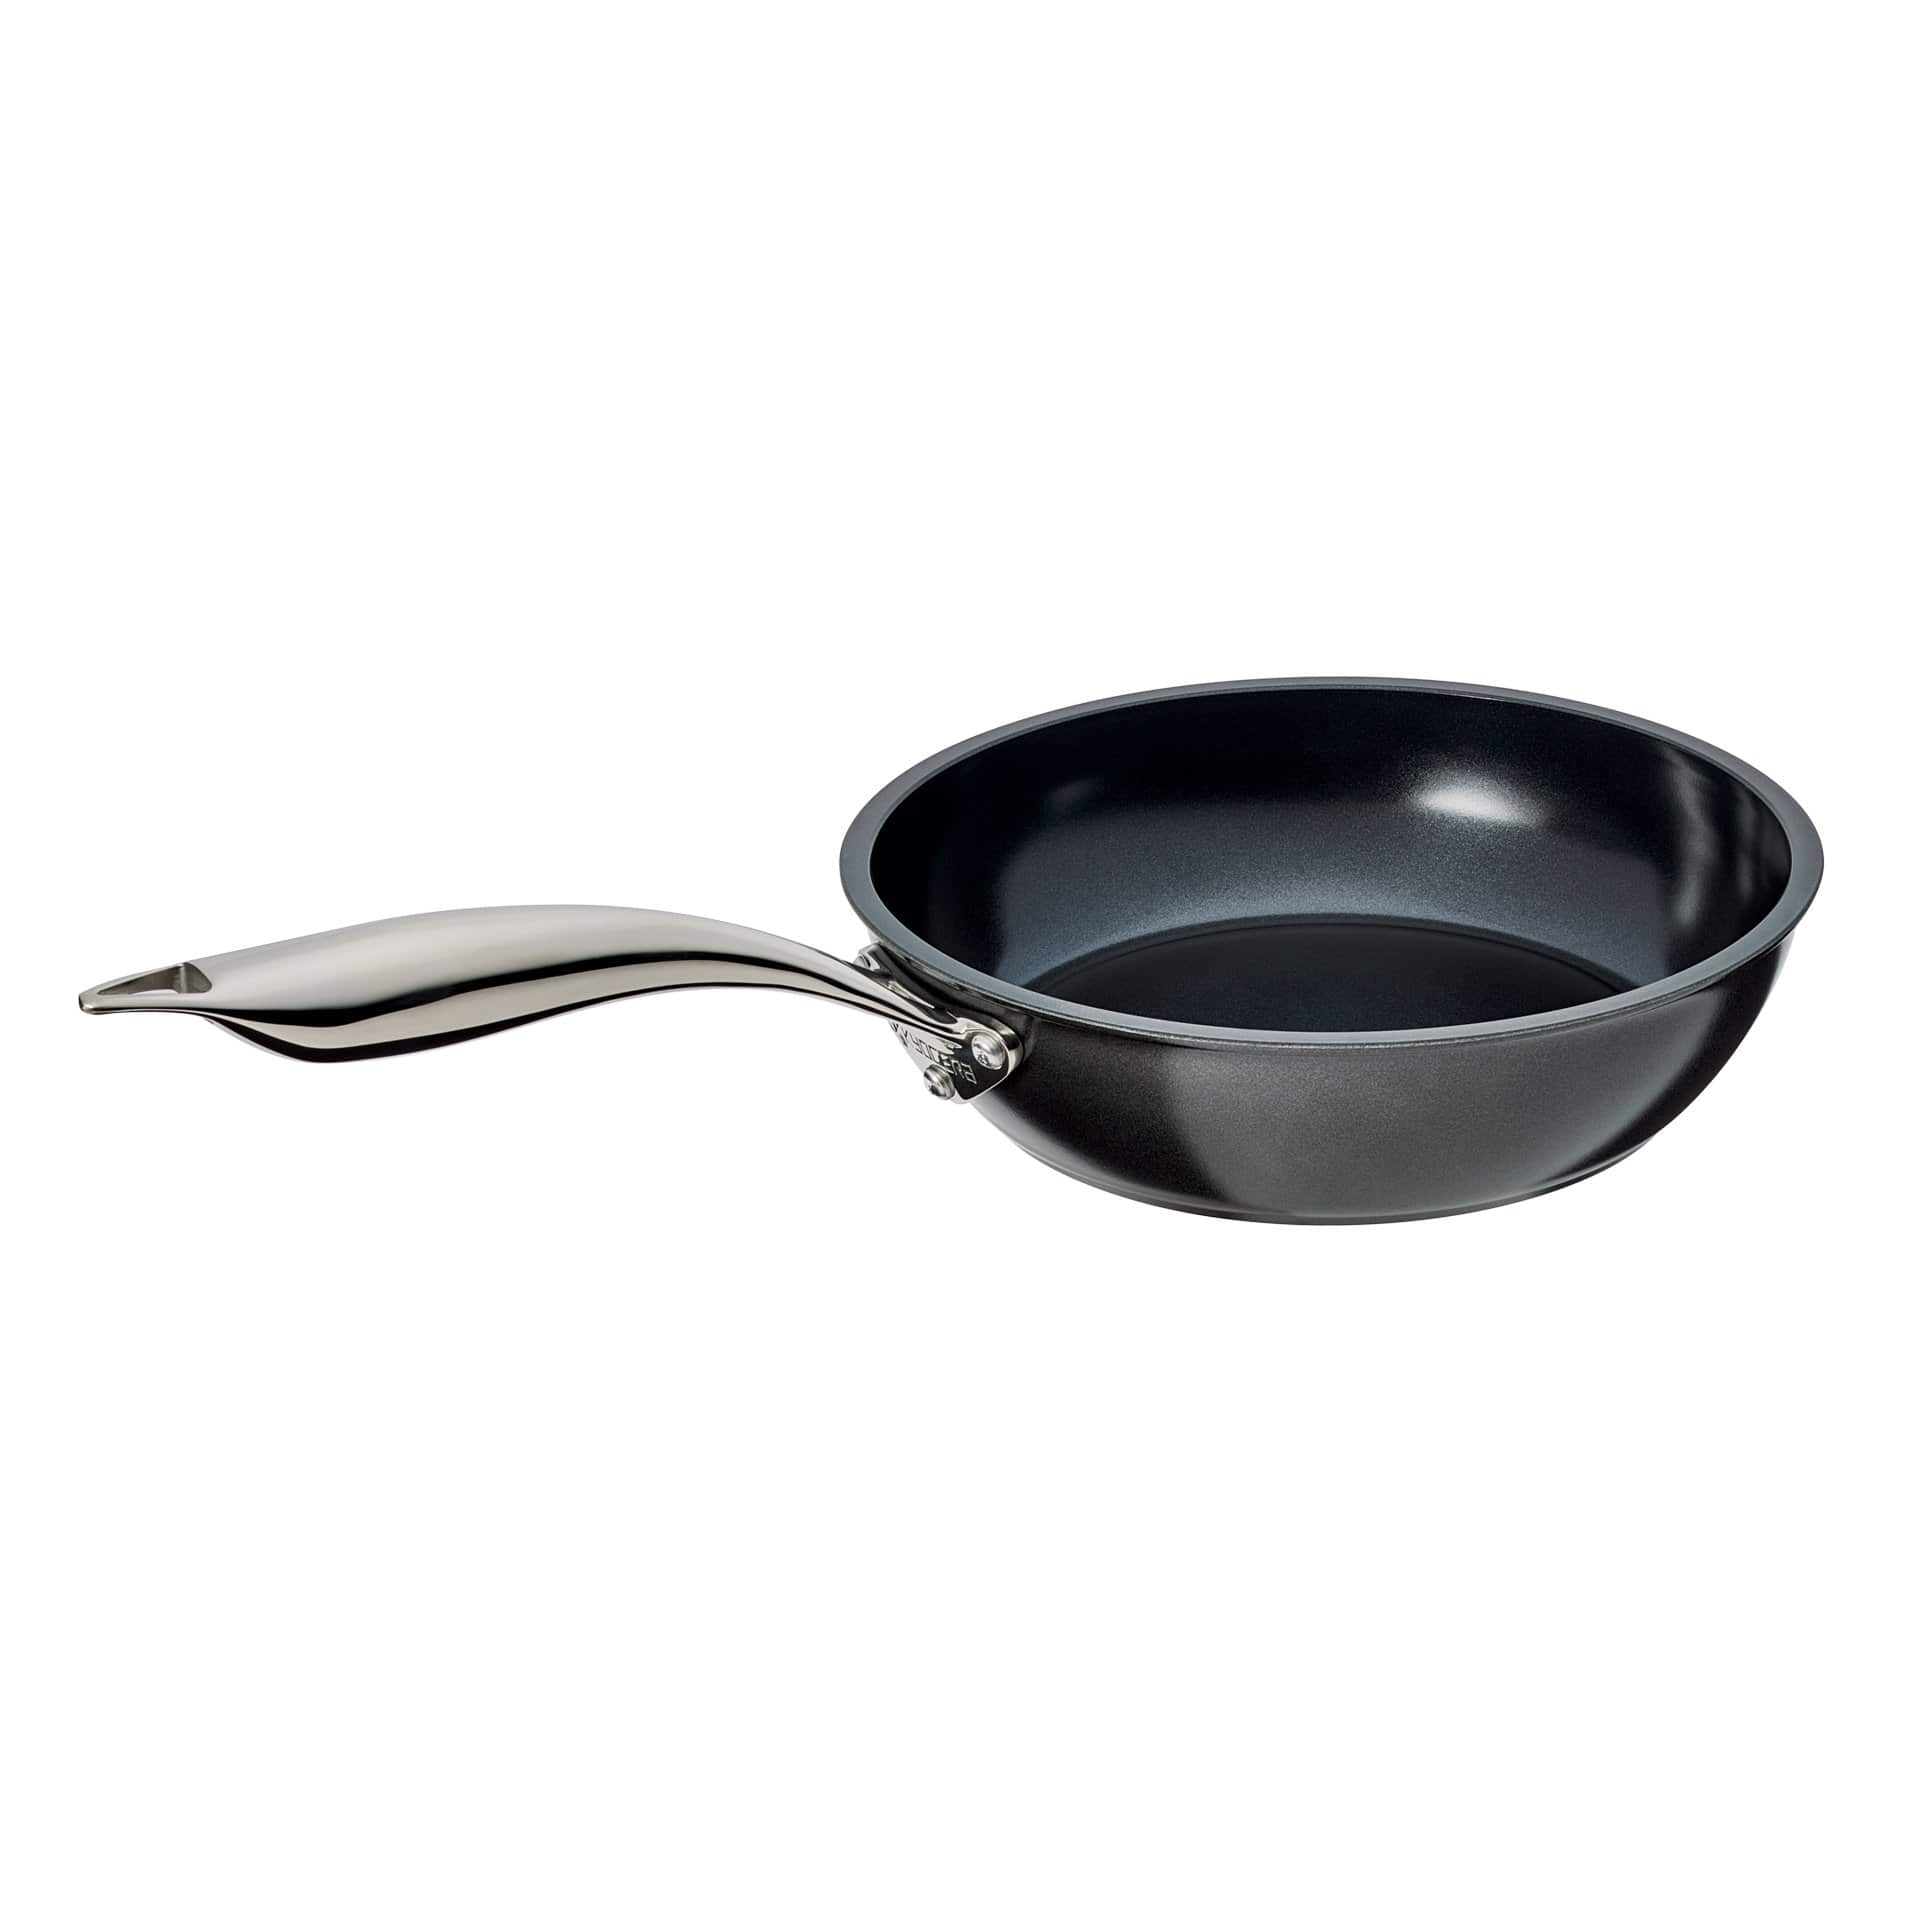 Zwilling Clad CFX 8-inch, Stainless Steel, Ceramic, Non-Stick, Fry Pan